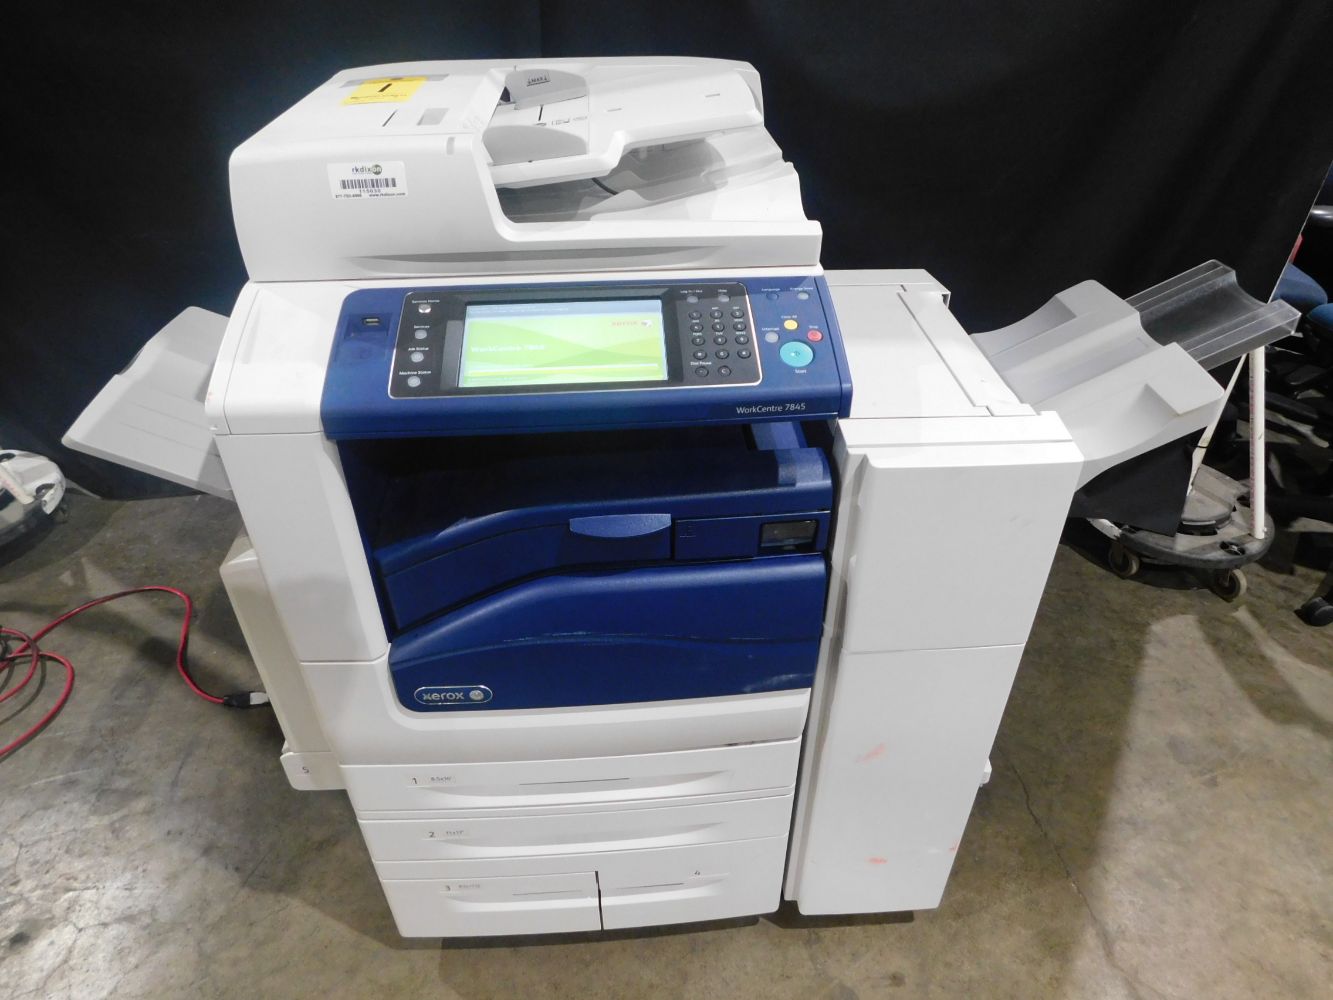 GYPC, Inc. Bankruptcy Auction - Xerox Copiers, Printers